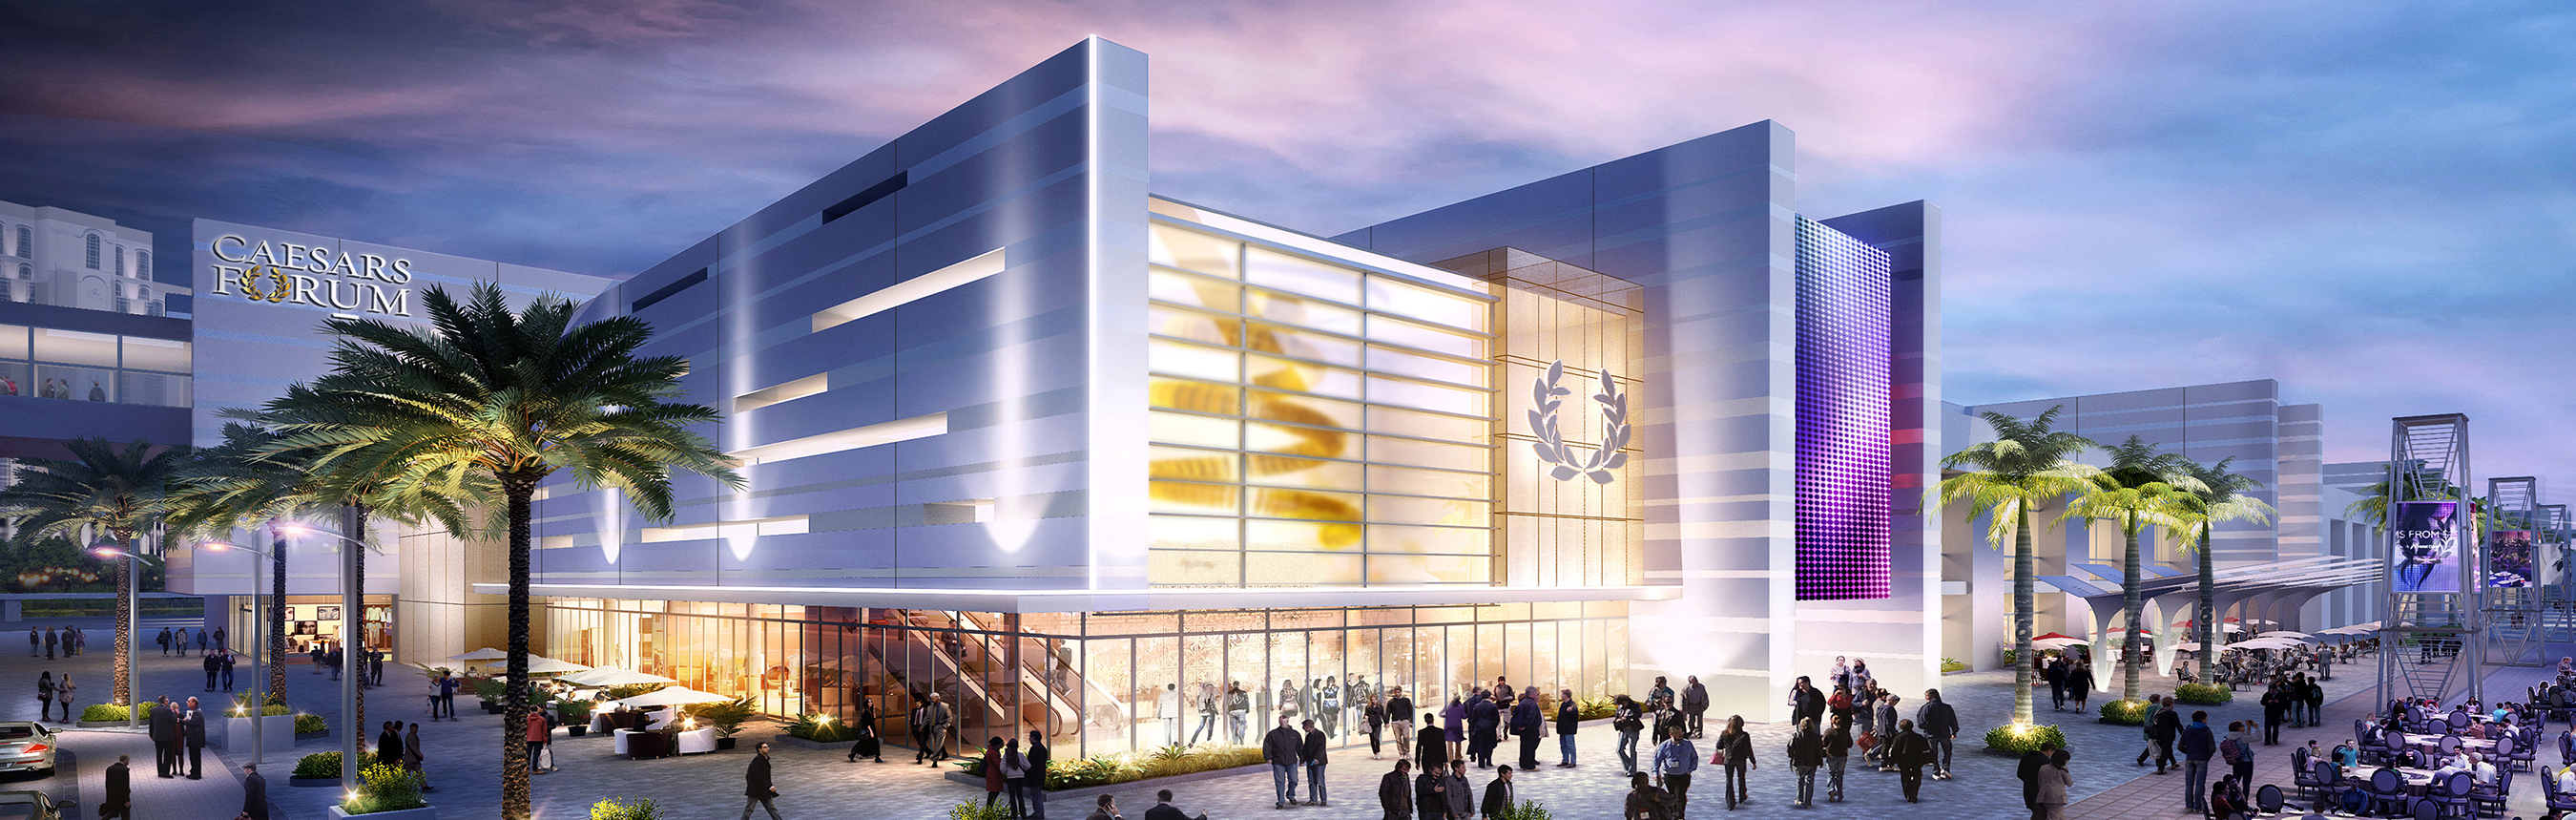 Caesars Entertainment breaks ground on CAESARS FORUM, a $375 million conference center in Las Vegas that’s set to open in 2020.